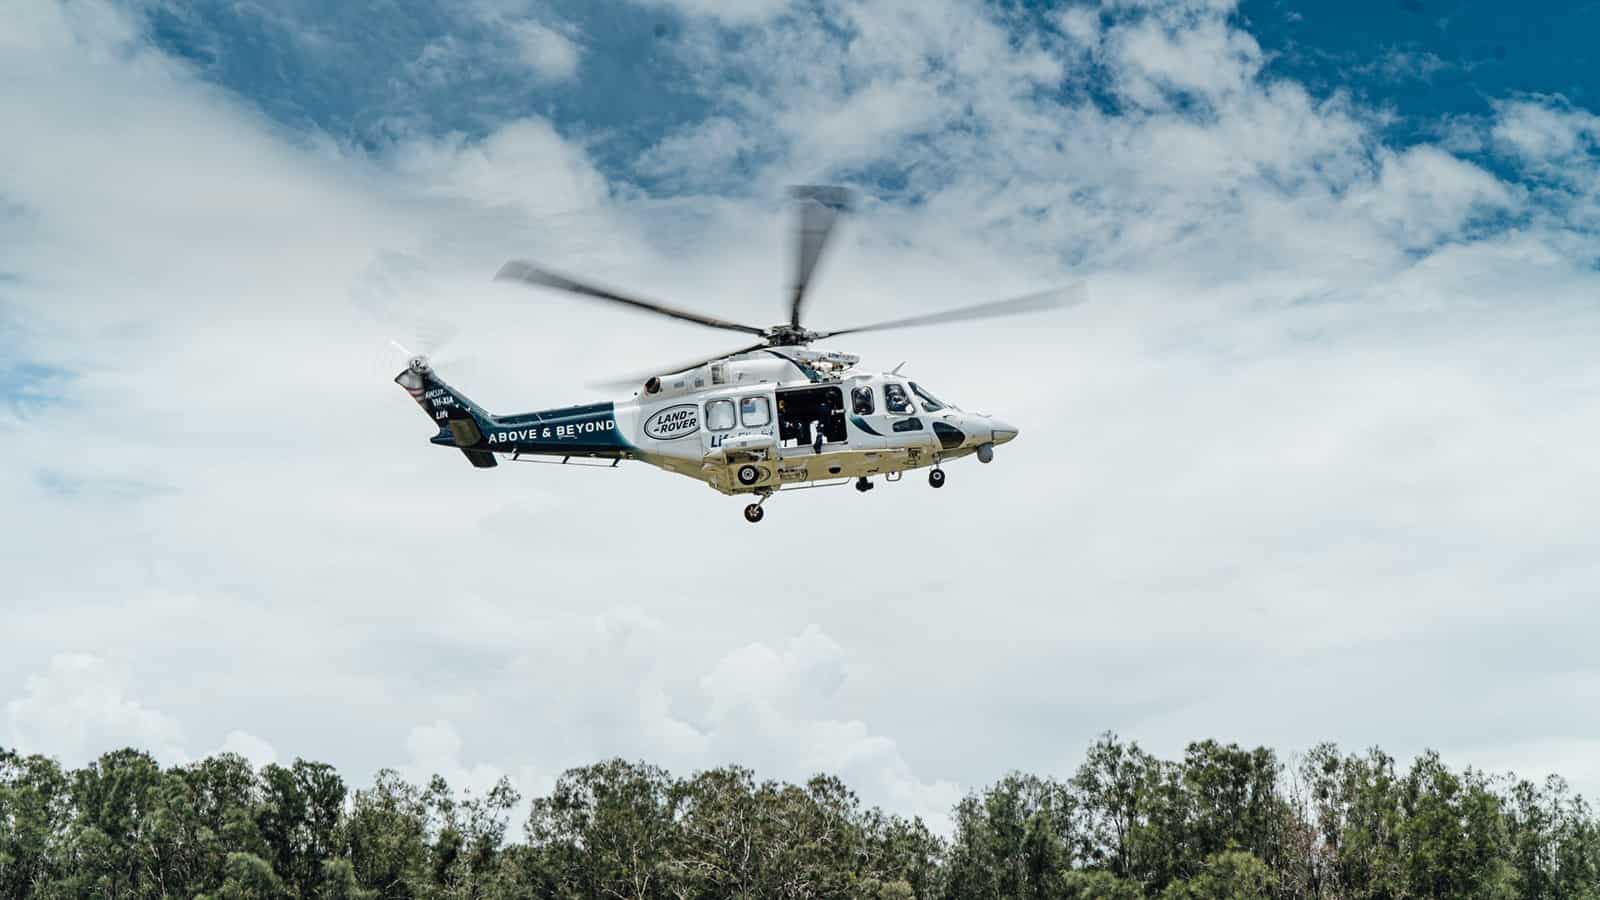 LIFEFLIGHT AND DEFENDER CONTINUE TO SUPPORT CRITICAL MISSIONS